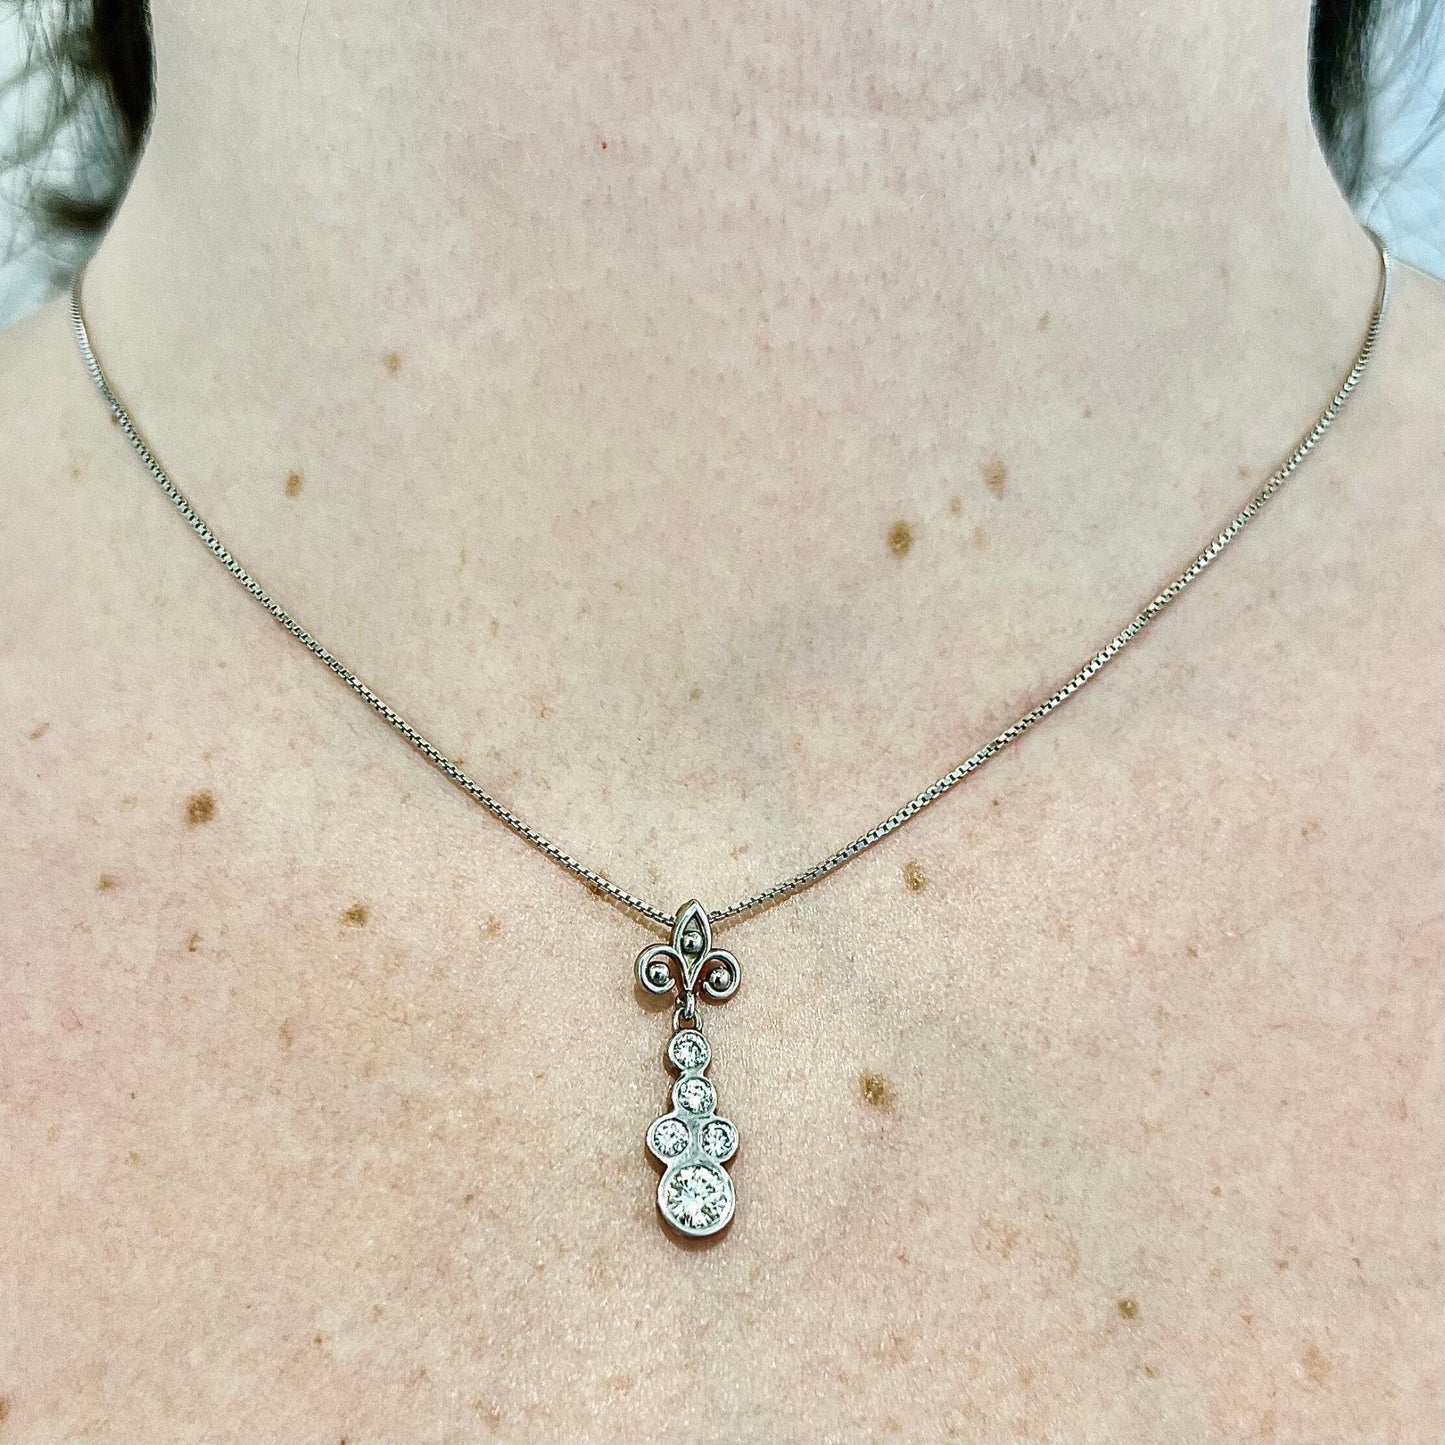 14K Vintage Diamond Pendant Necklace - White Gold Pendant - Diamond Necklace - Vintage Pendant - Fleur De Lis Pendant - Best Gifts For Her